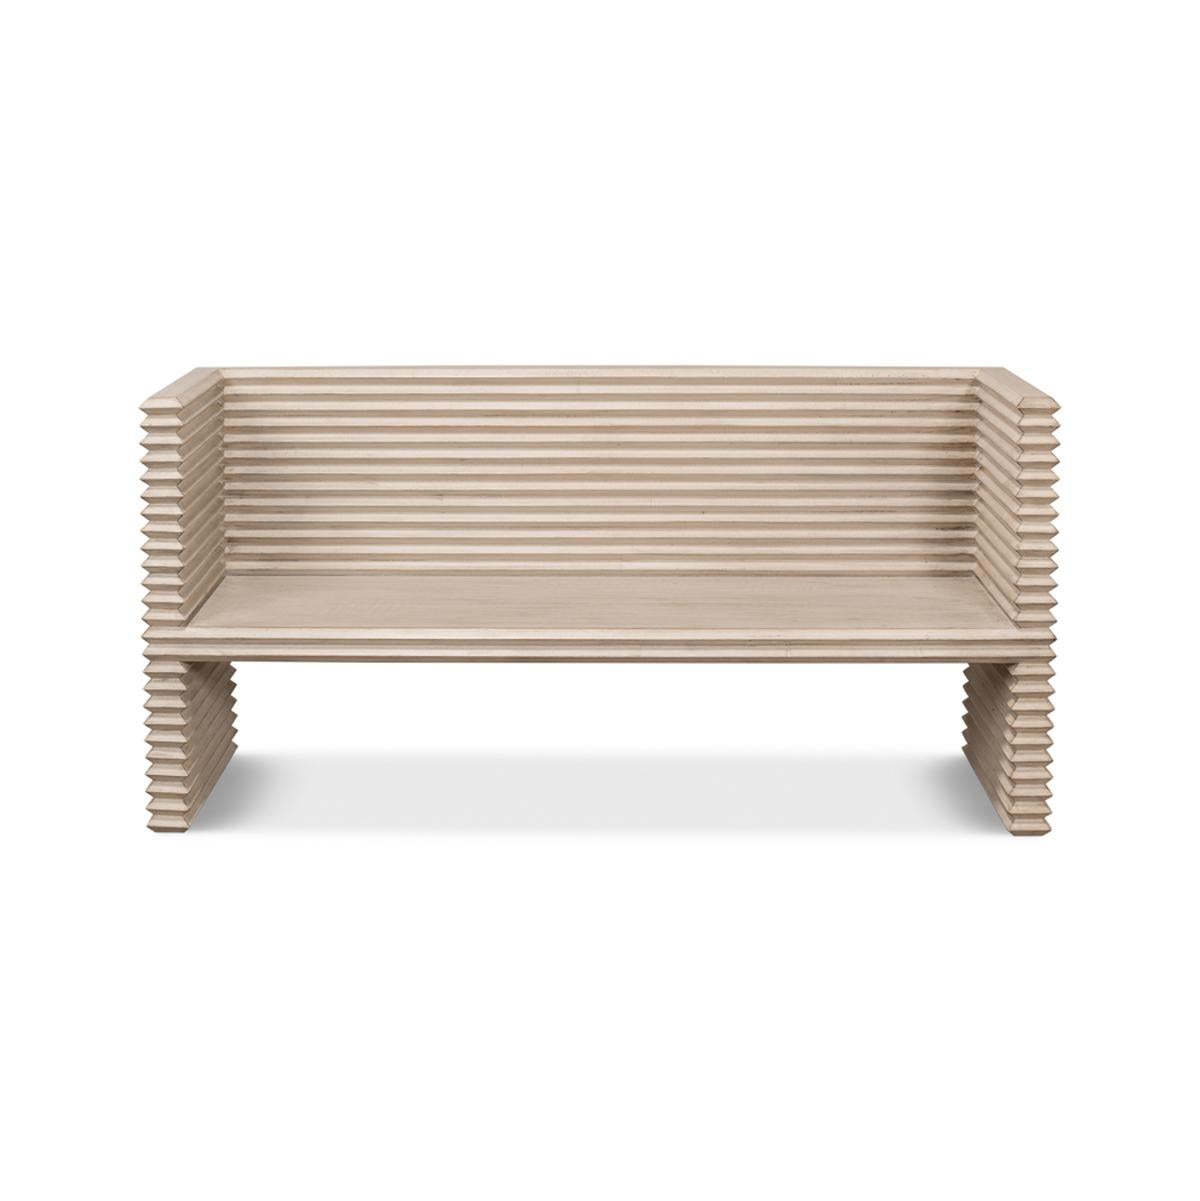 Crafted with precision and painted in a soothing stone grey hue, this bench exudes rustic charm. The reclaimed pine adds character, telling a story of history and sustainability. Elevate your home décor with this unique piece that effortlessly